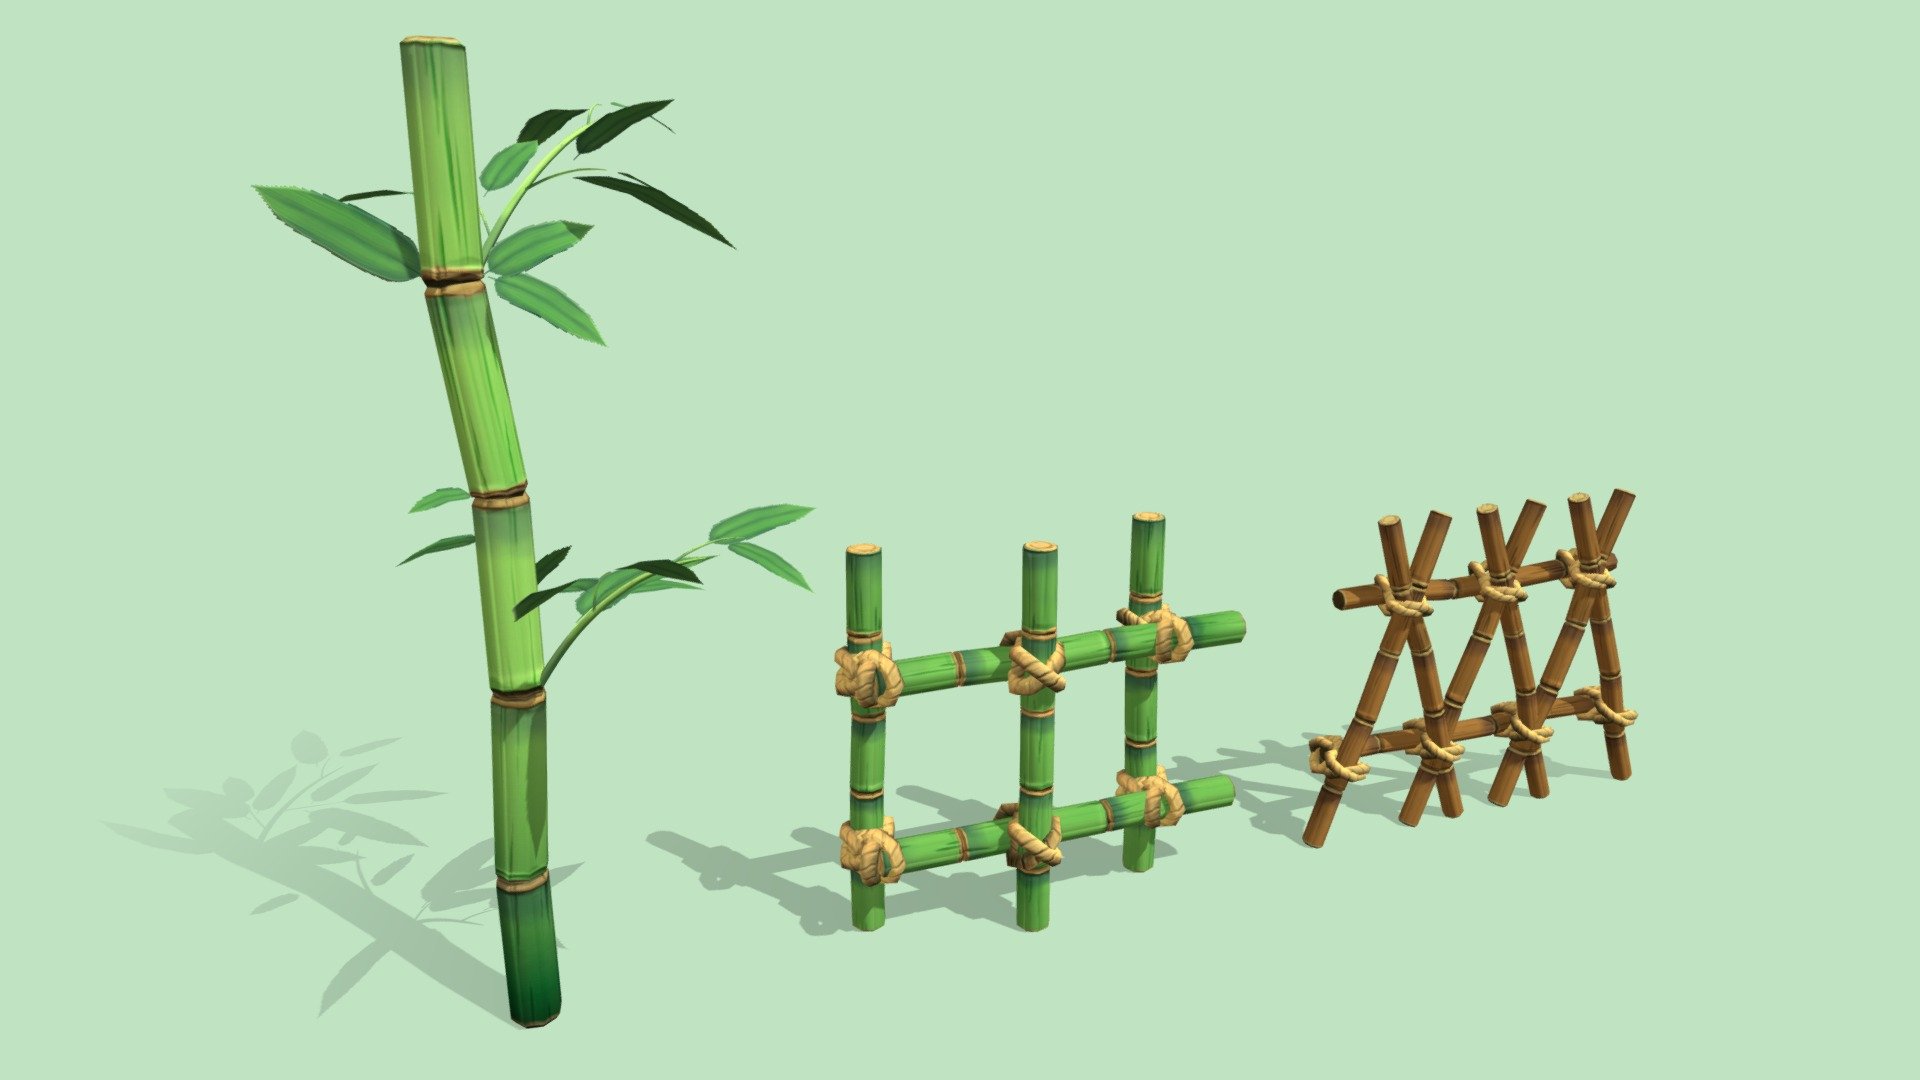 If you need additional work done do not hesitate to contact me, I am available for freelance work.

Bamboo and Bamboo Fences for a nice garden or shrine/temple scene.

Highpoly sculpted in Nomadsculpt.
Lowpoly made in Blender.

Highpoly and Lowpoly-model in Blend-file is included in additional file 3d model